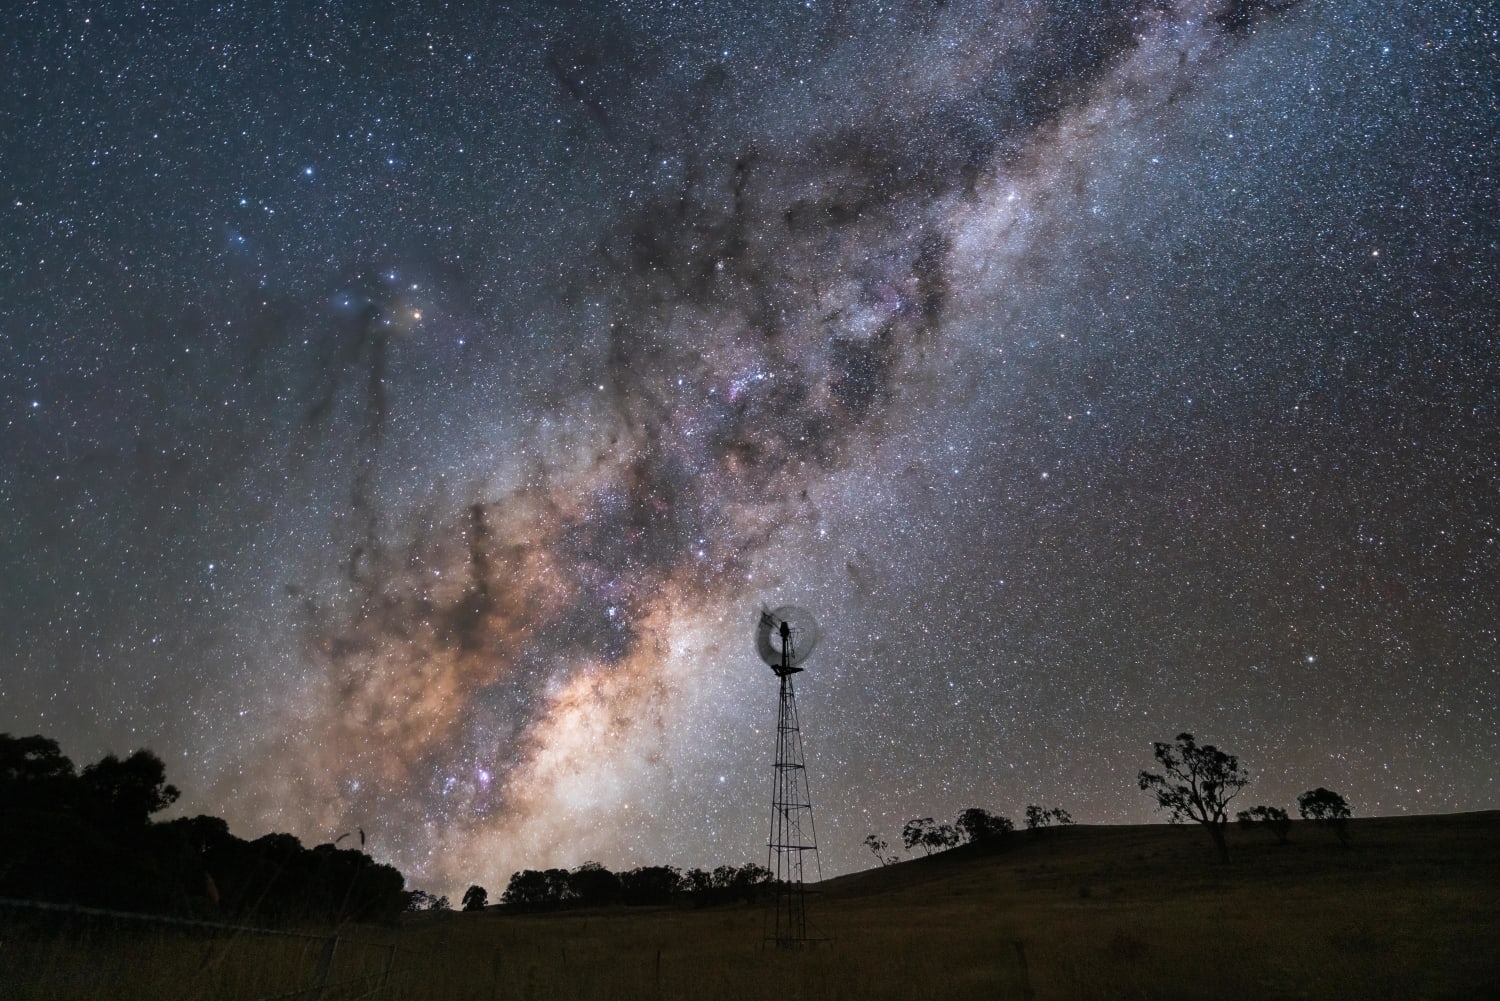 Milky Way rising above a small Windmill, 15 minutes outside of Canberra, Australia